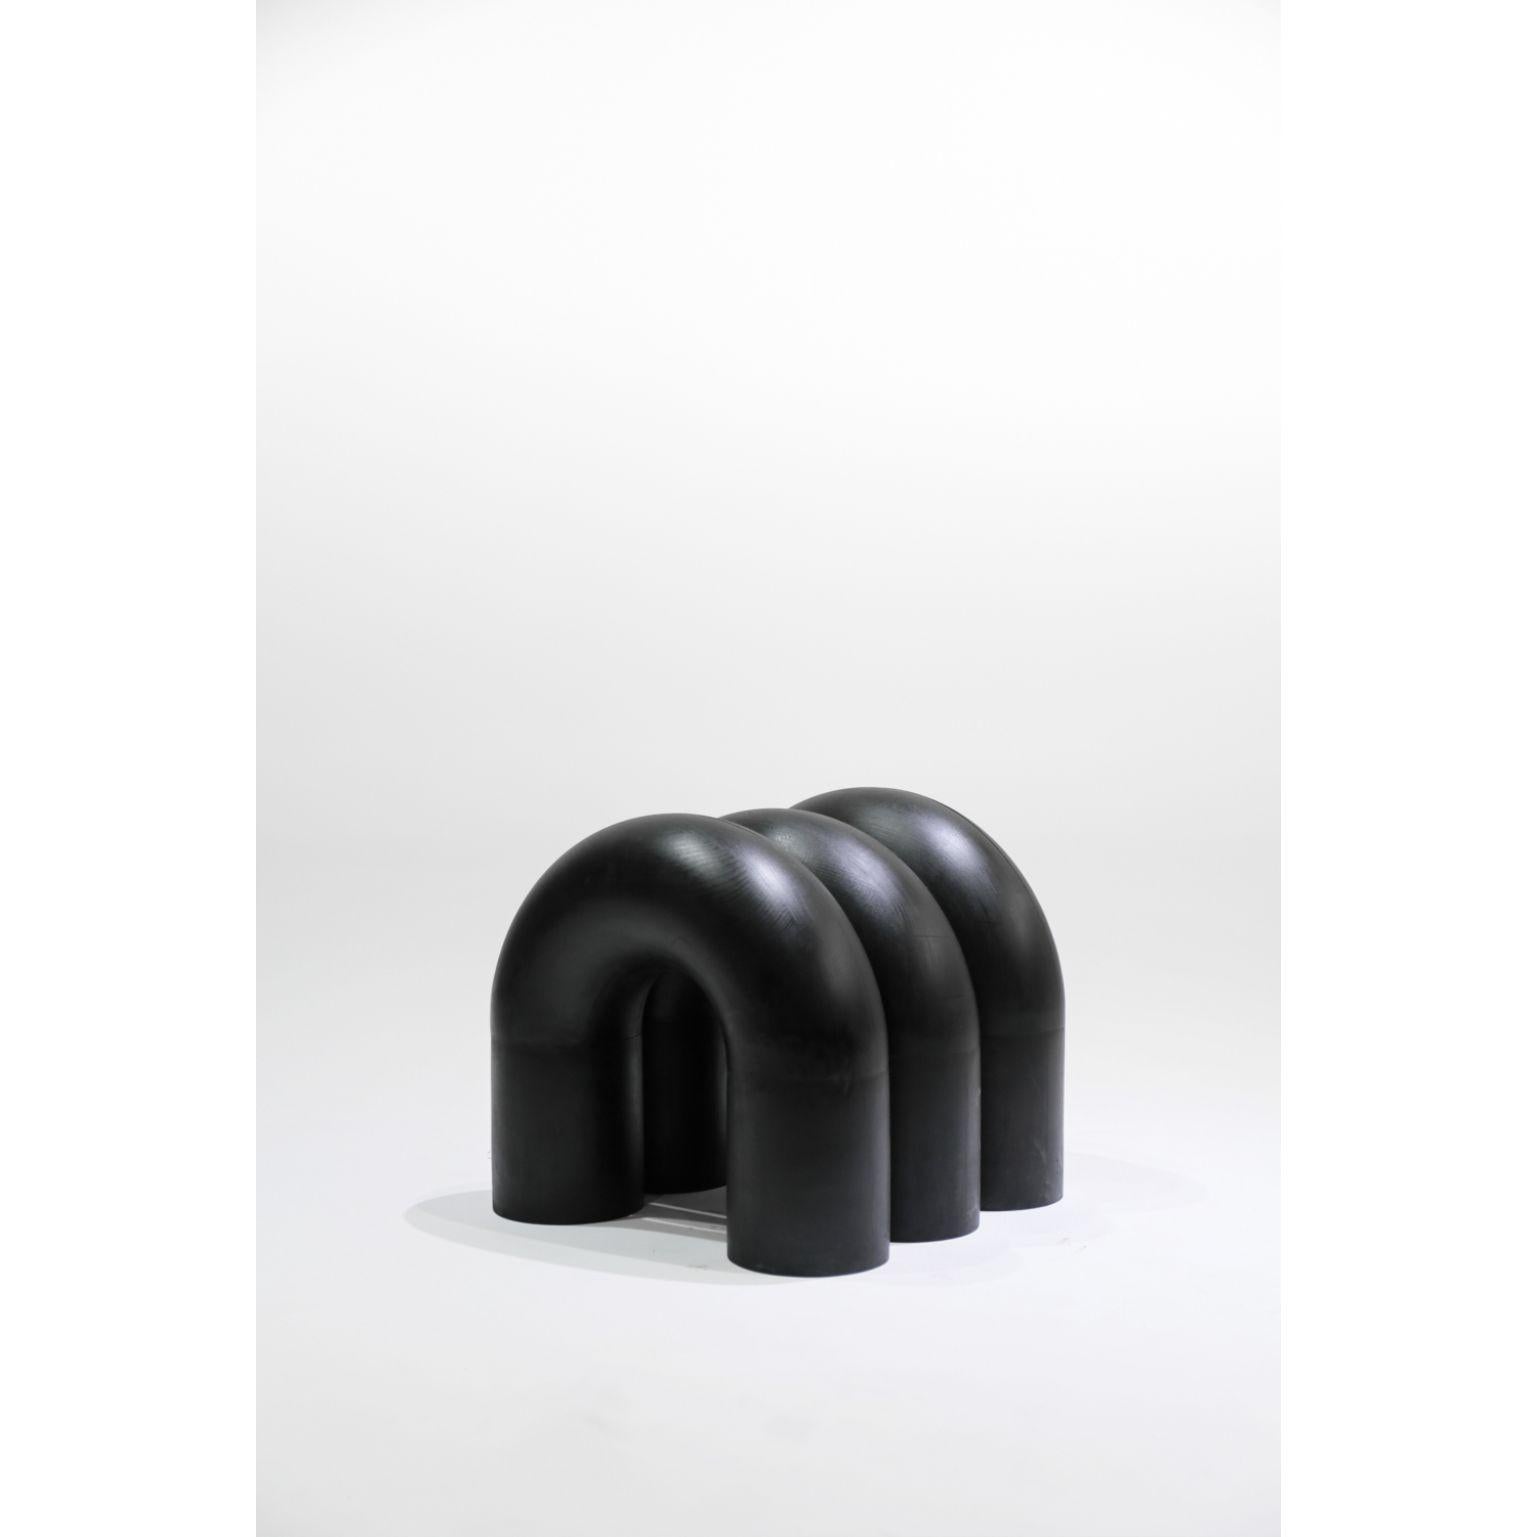 Time of Action No. 21-1 by Chaeyoung Lee
Materials: Ebonized and carved wood
Dimensions: 45 x 45 x 40 cm

Time of Action is a minimal and carefully crafted furniture collection created by South Korean-based designer Chaeyoung Lee.
Time of